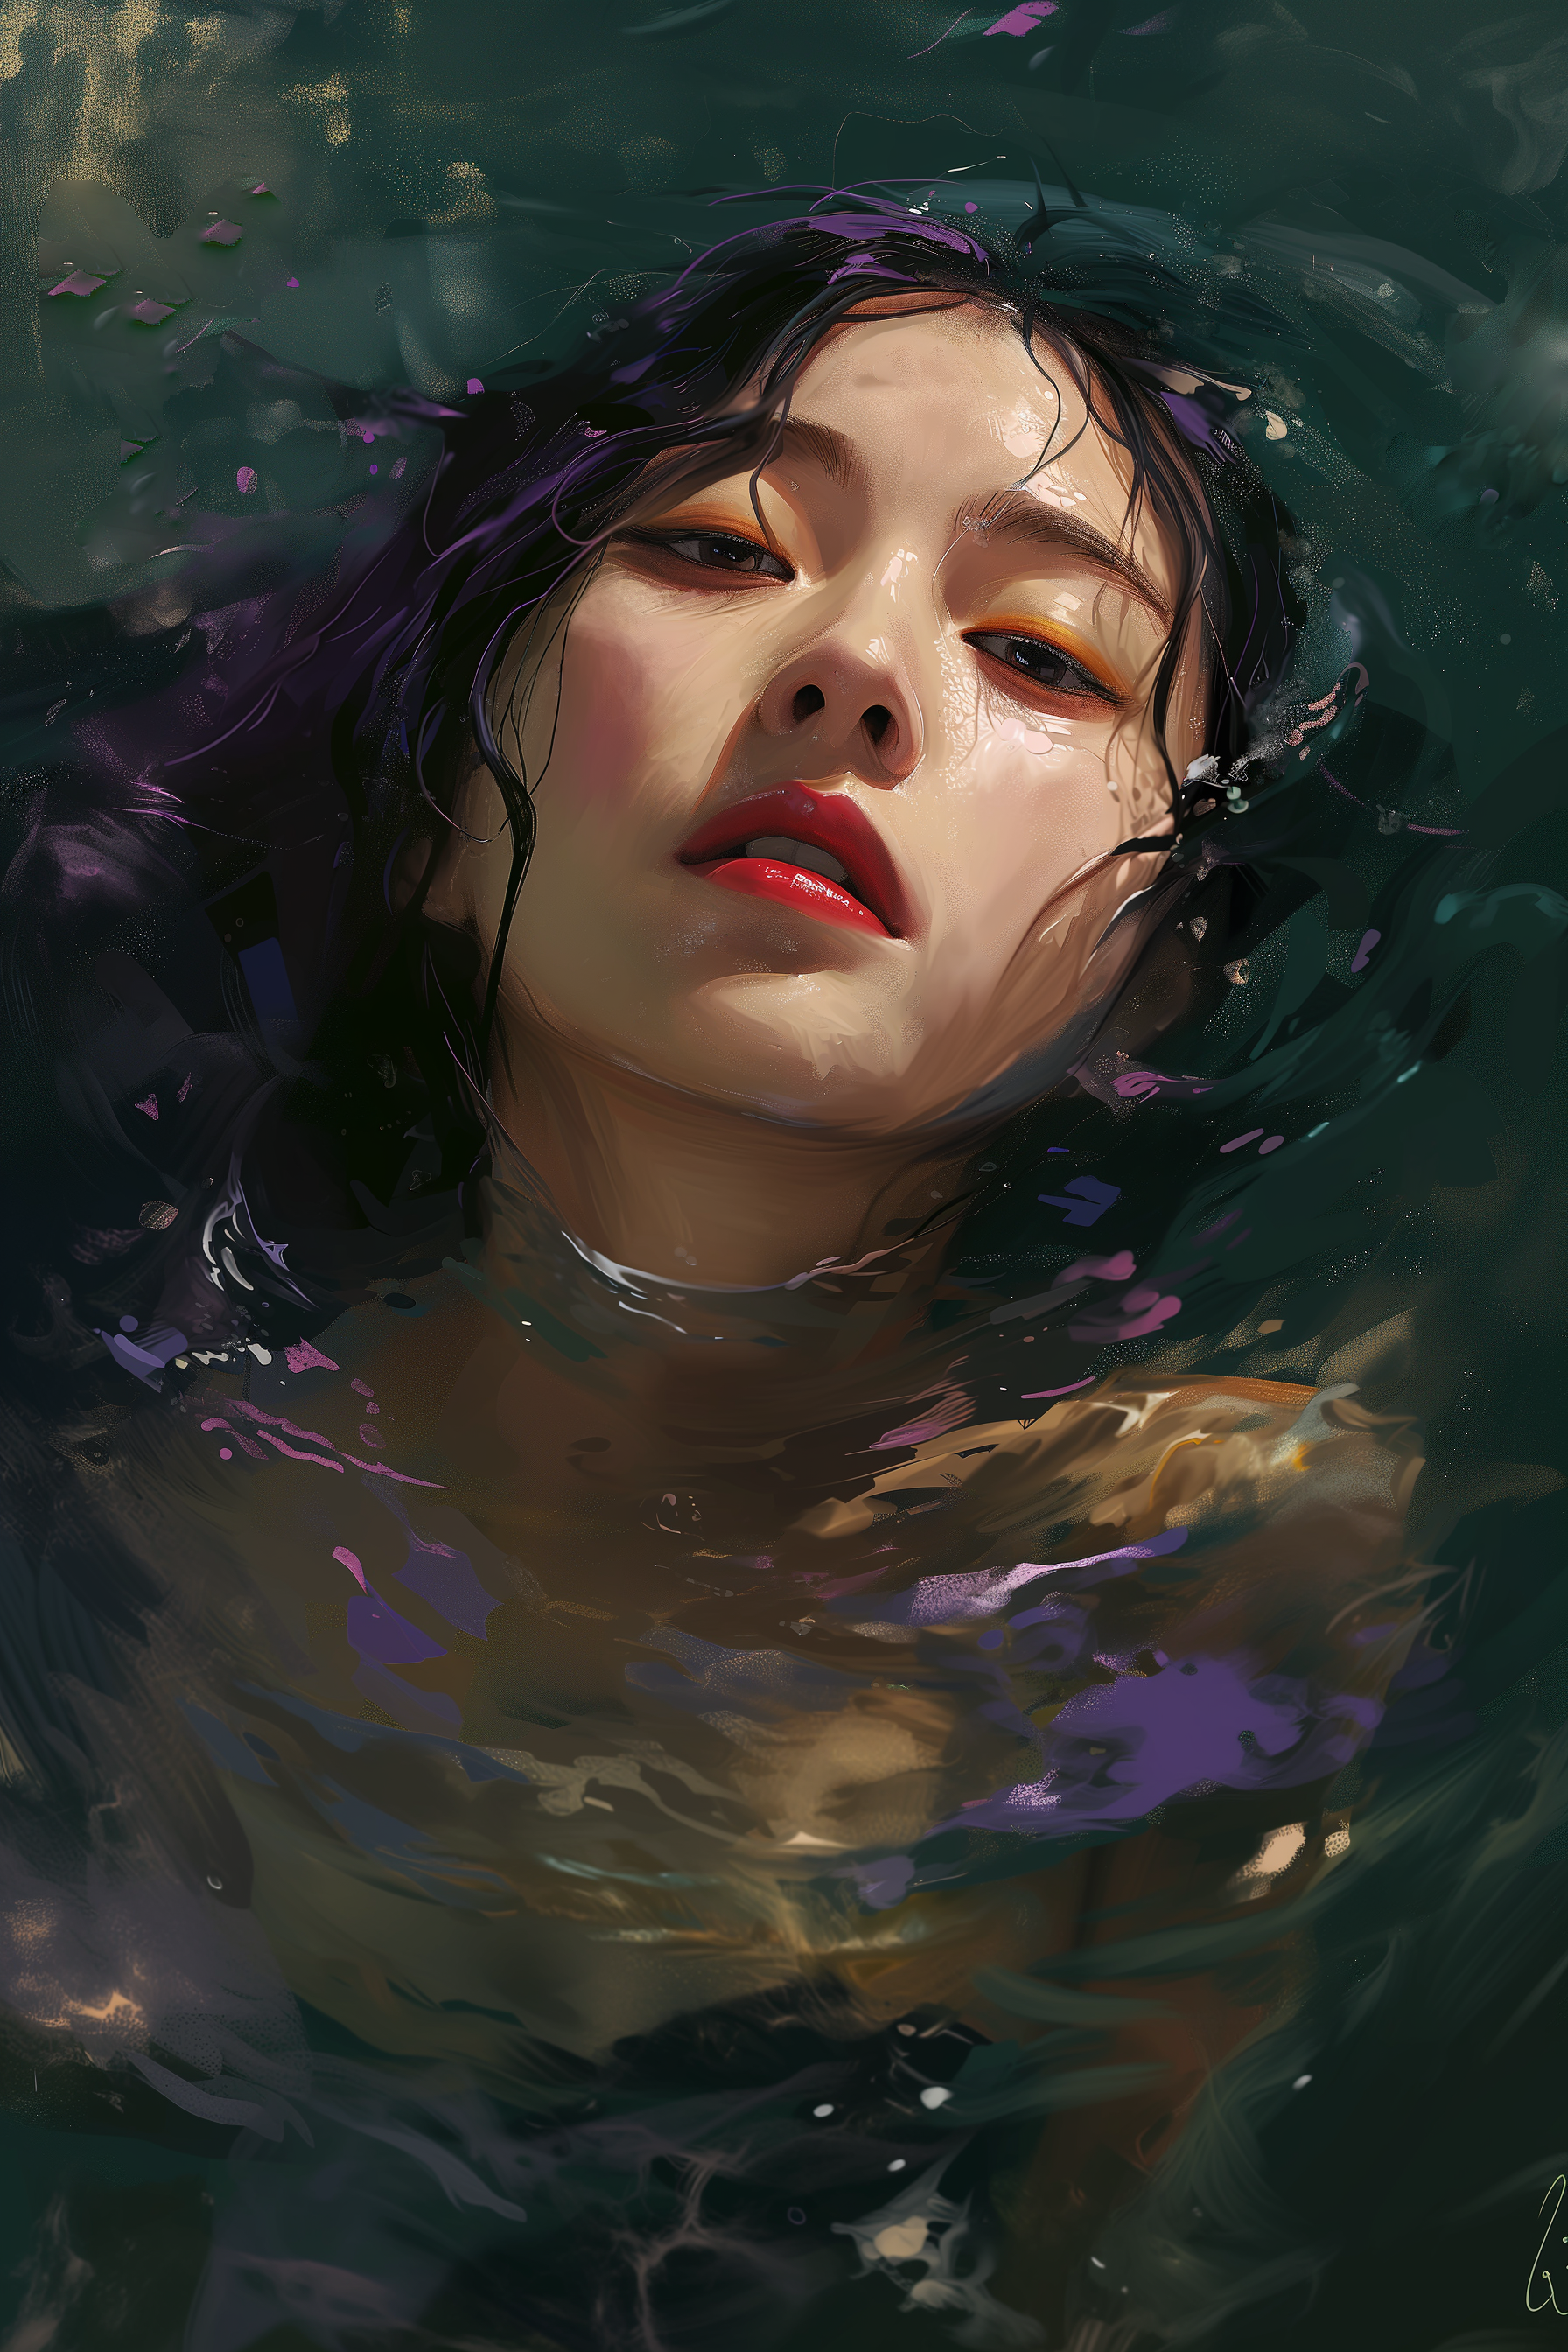 A mermaid with east Asian features floating with her face peeking out from the water.